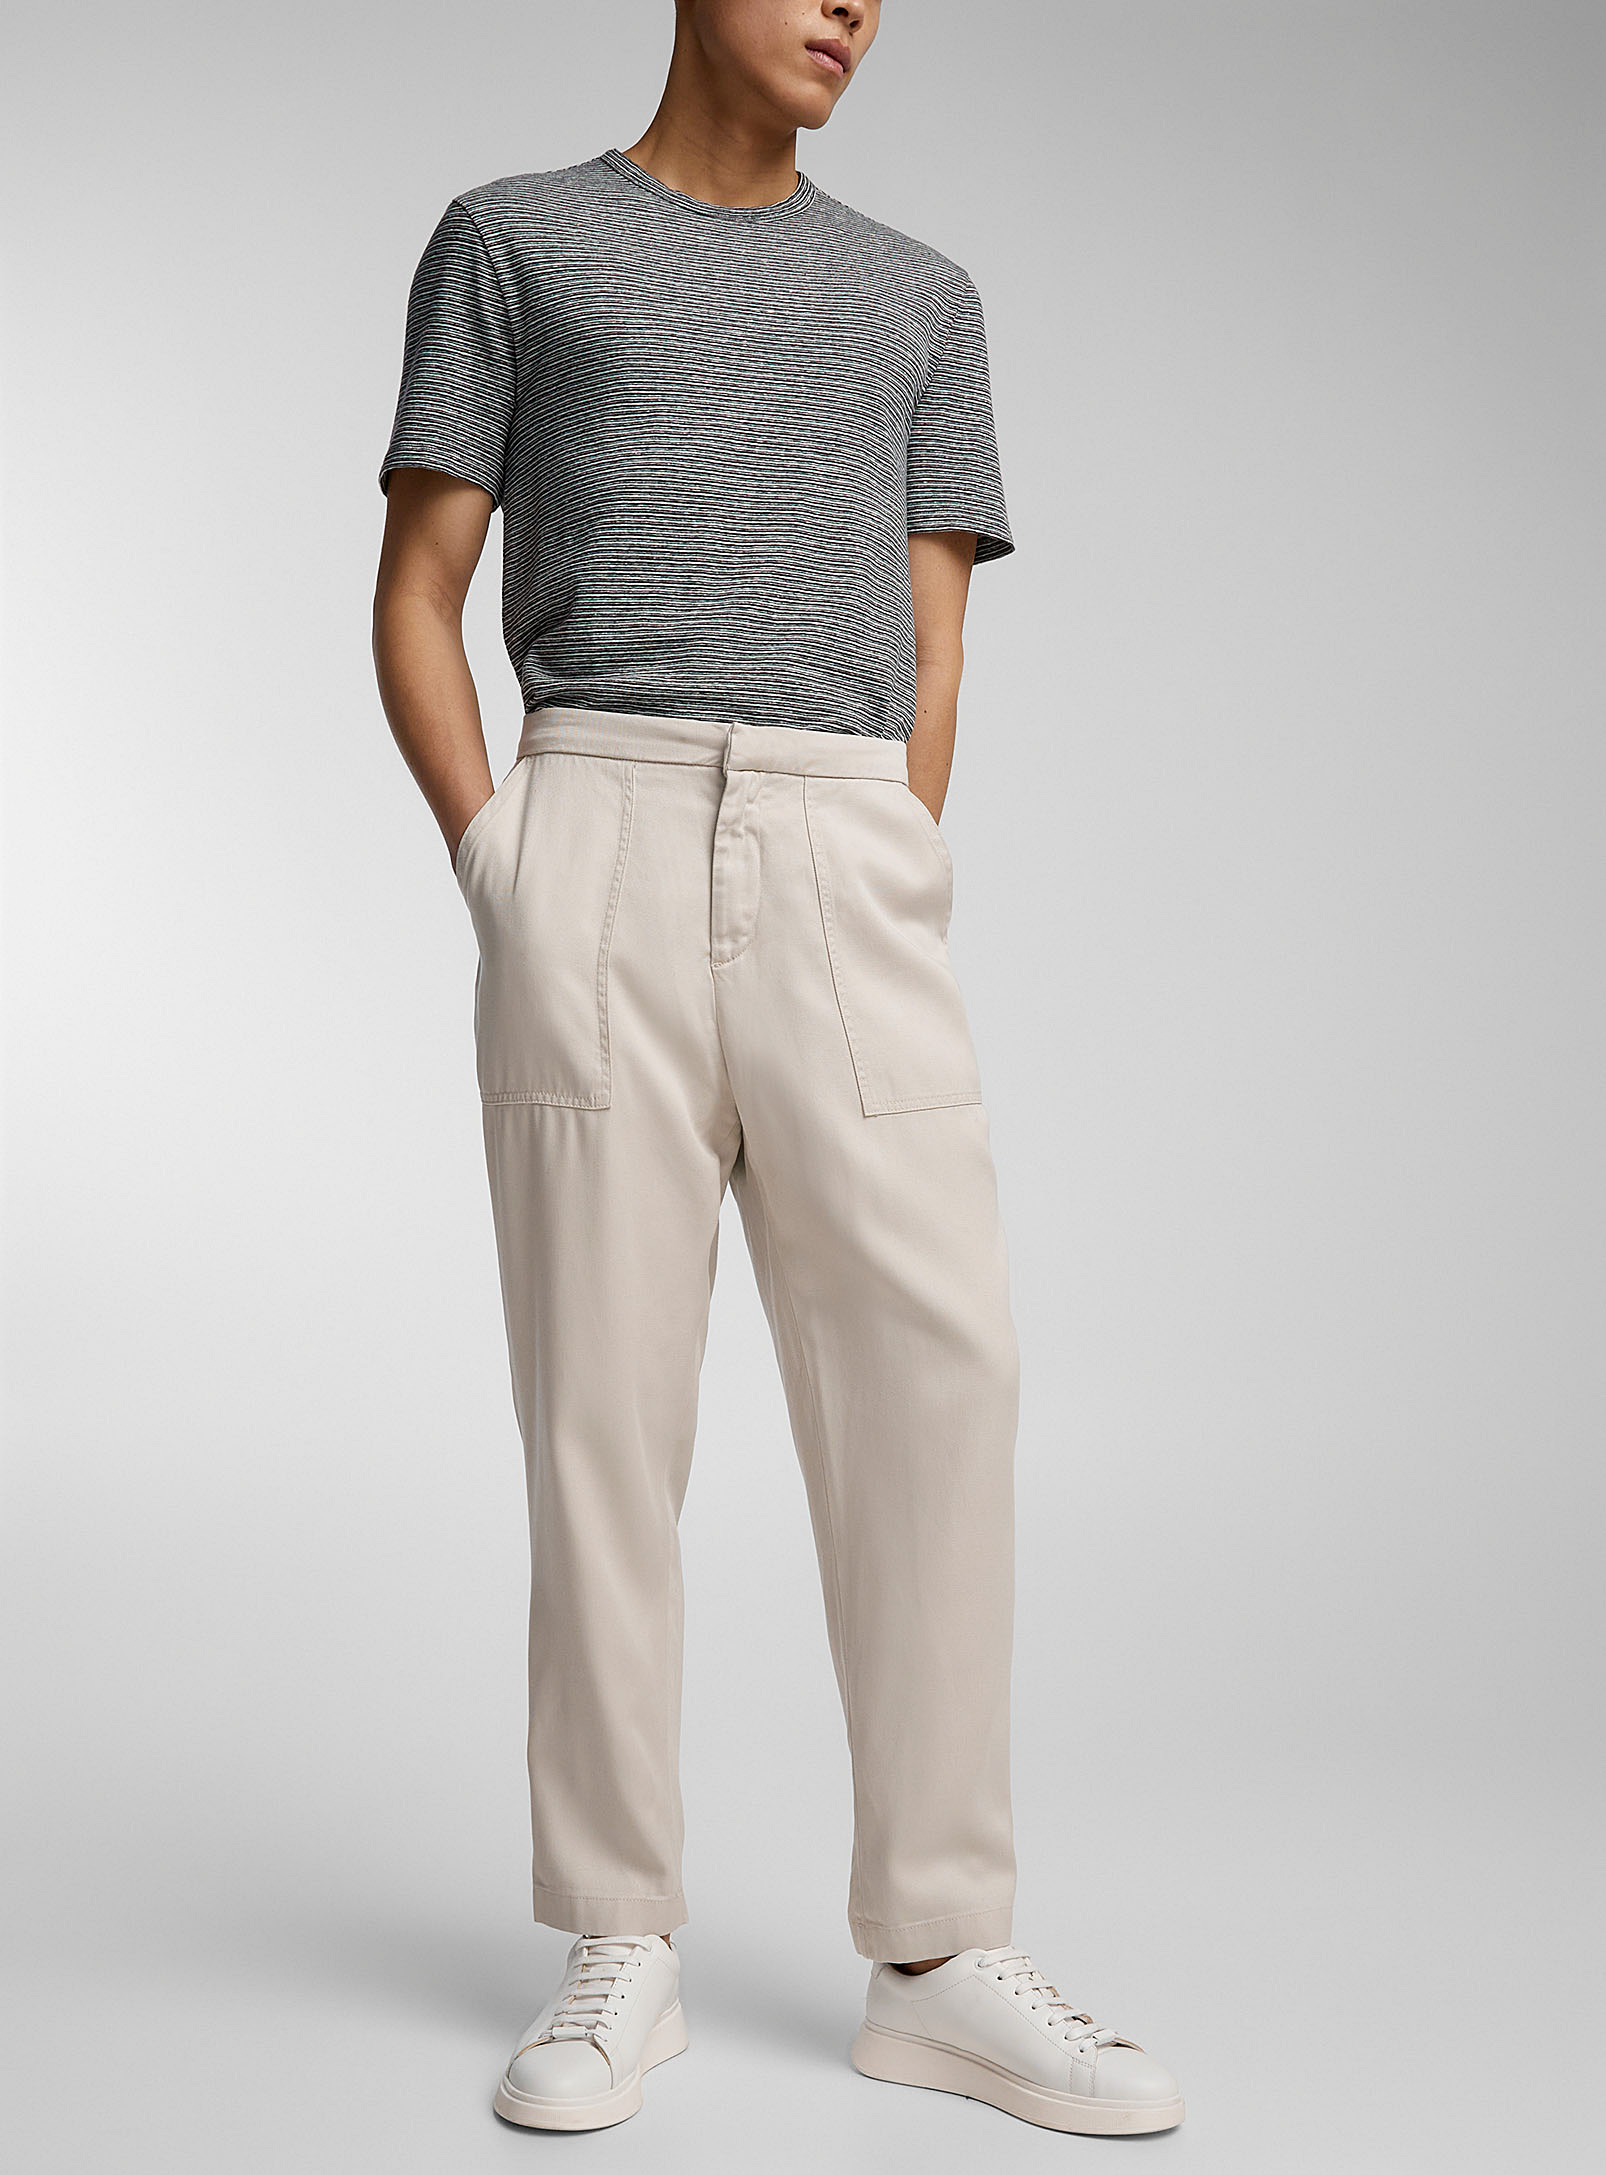 Officine Générale - Men's Paolo flowy twill chinos